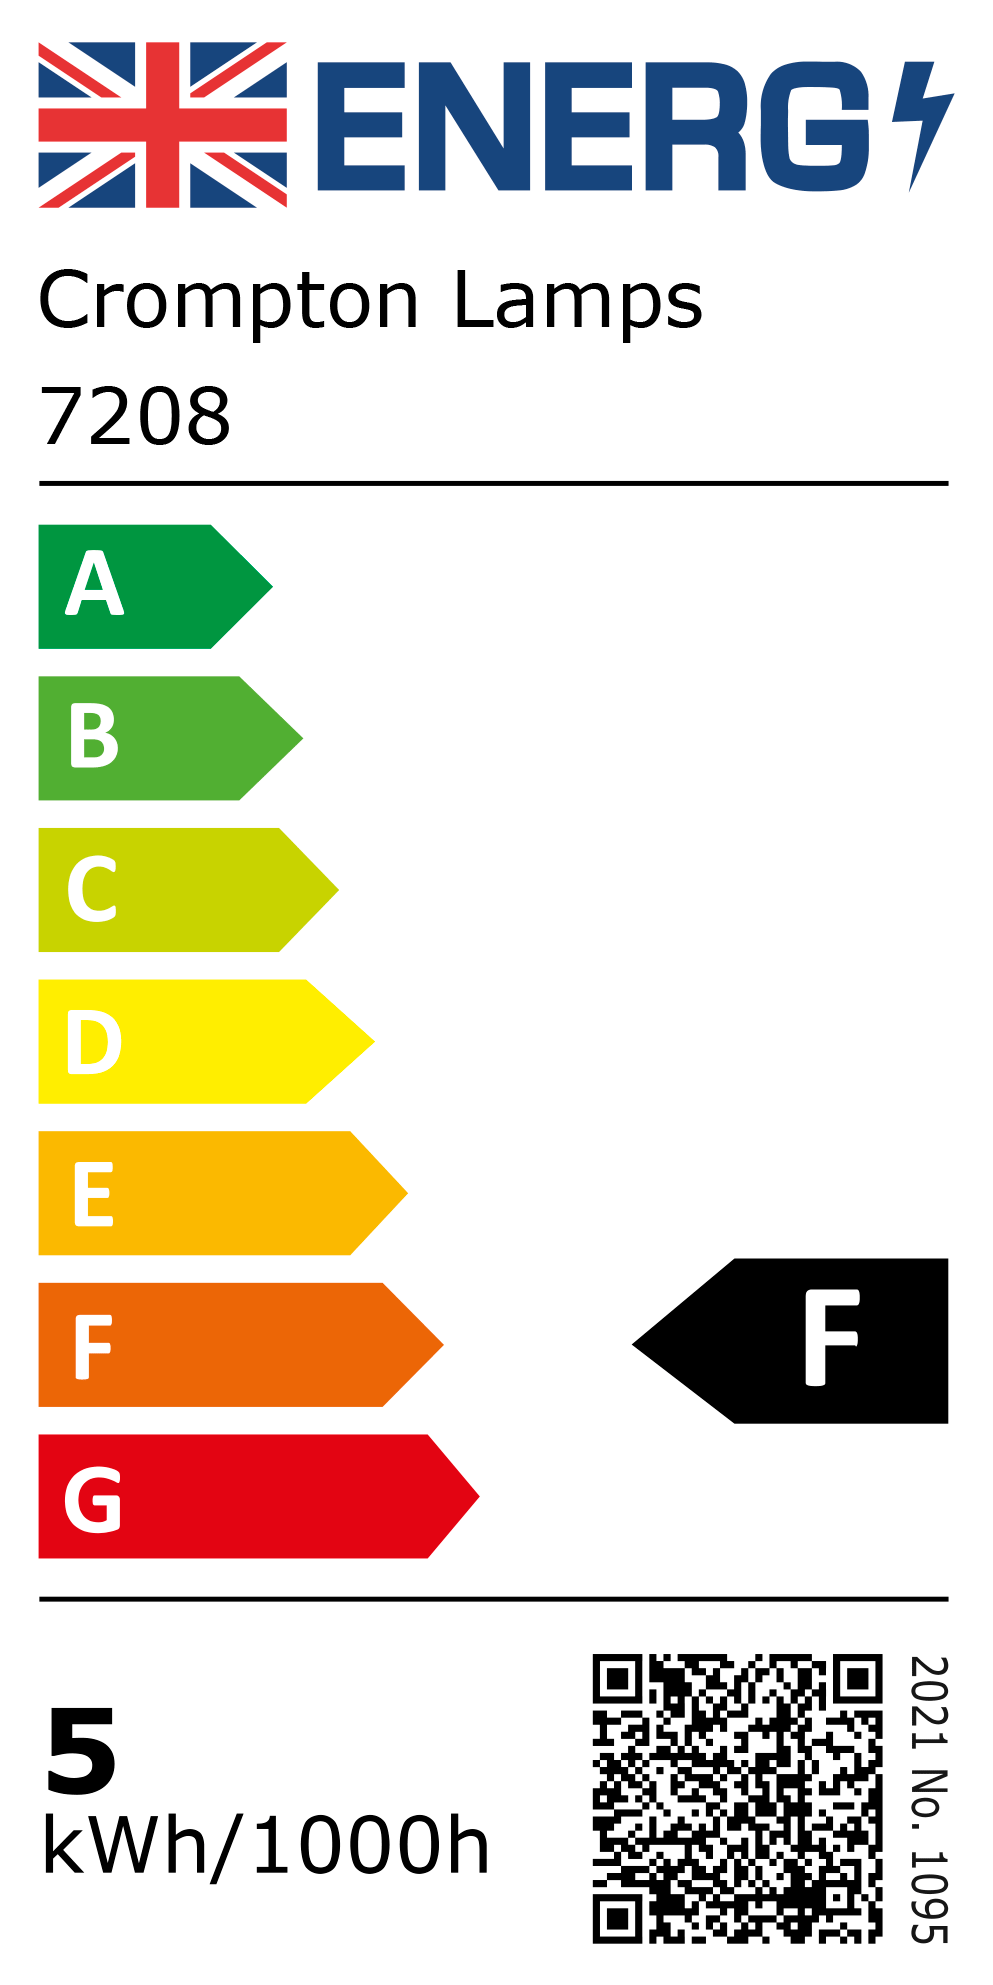 New 2021 Energy Rating Label: Stock Code 7208